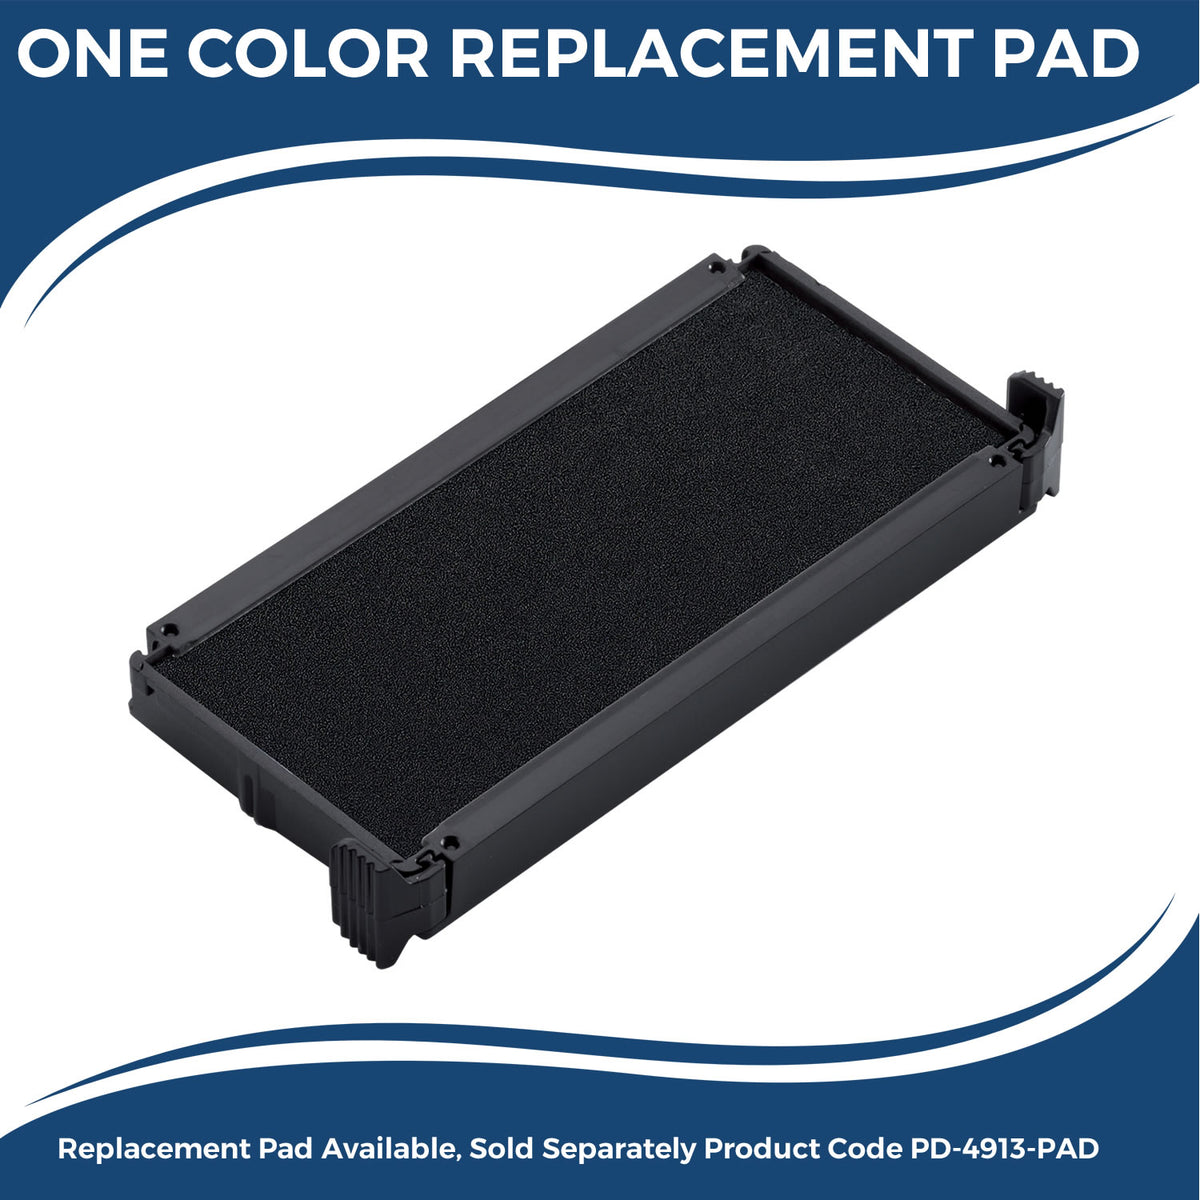 Large Self-Inking Additional Postage Required Stamp 4873S Large Replacment Pad